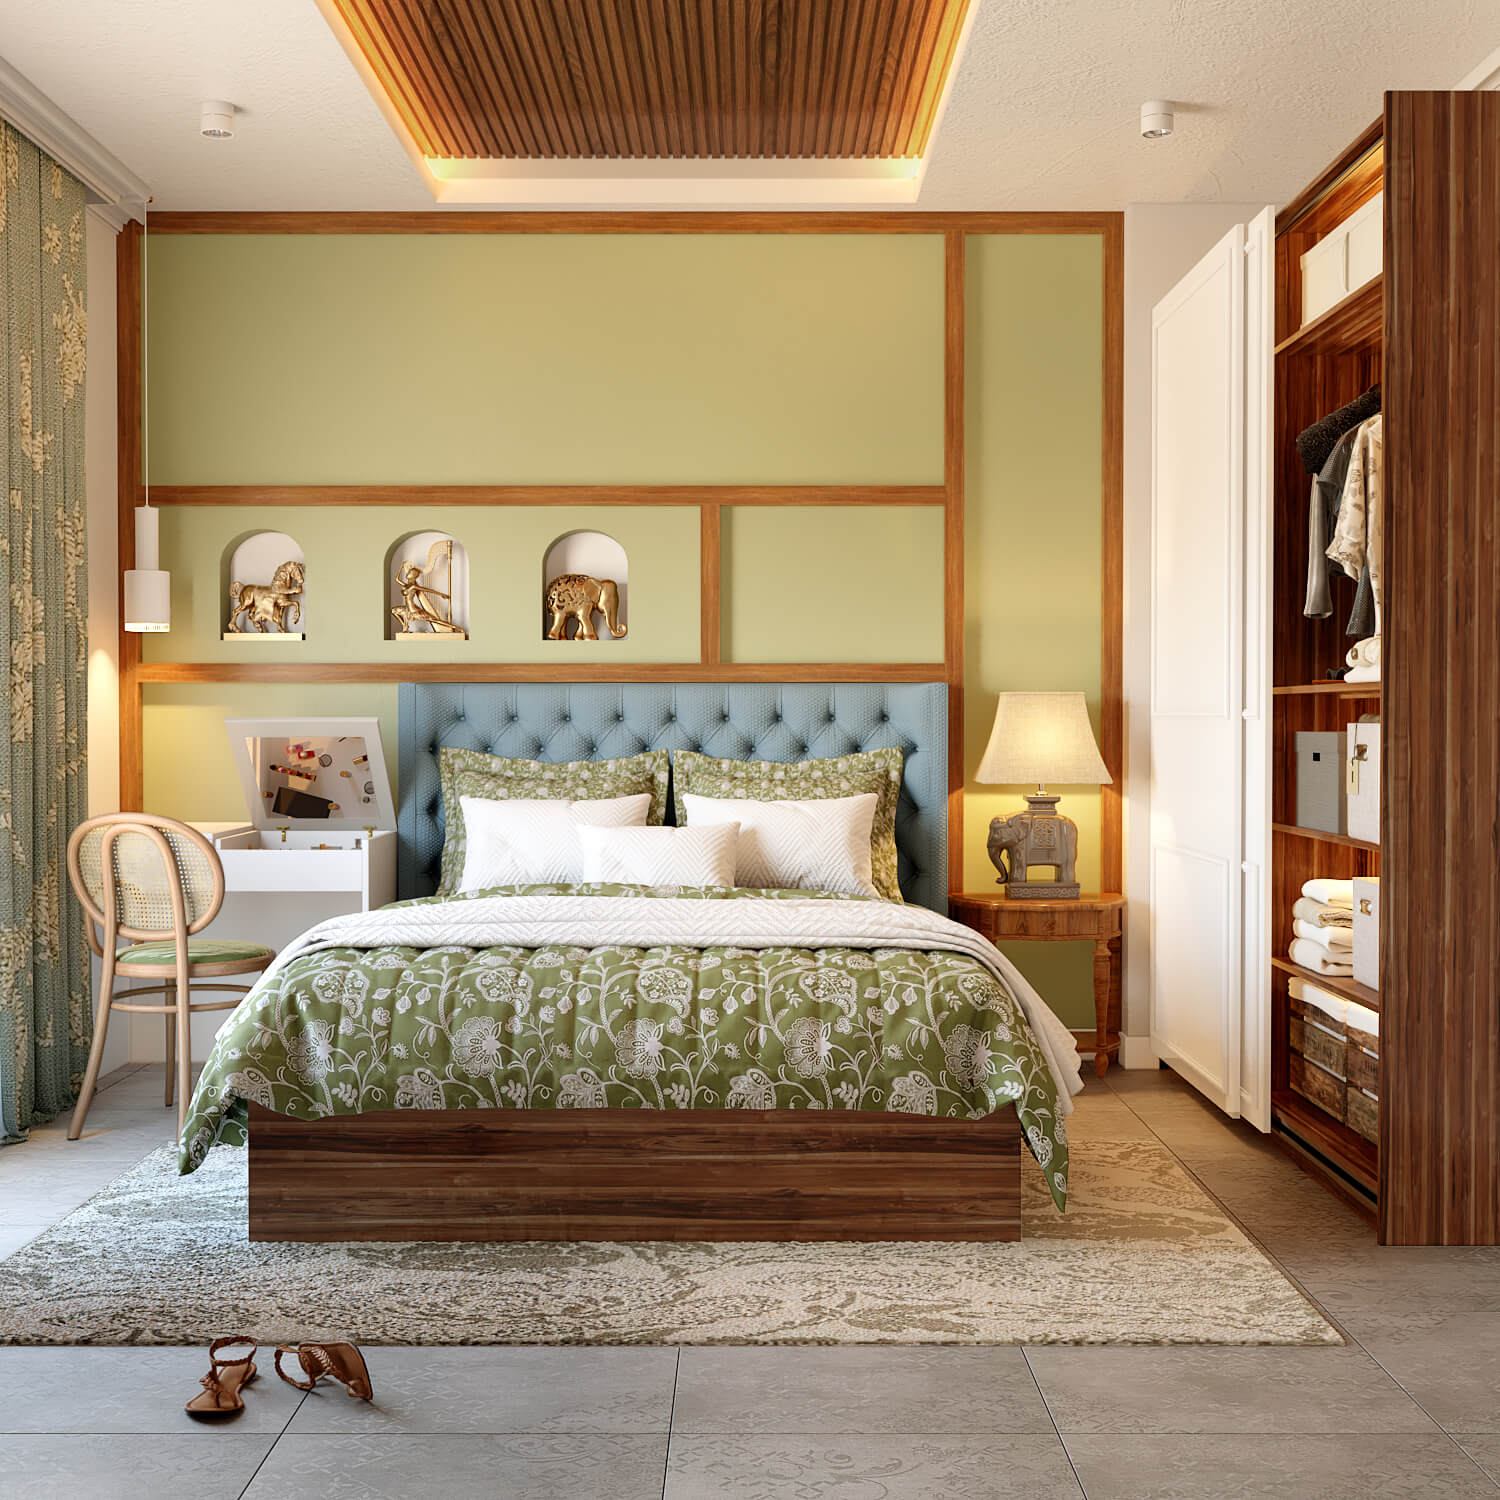 Bedroom designers in Pune created a bedroom with wardrobe and vanity